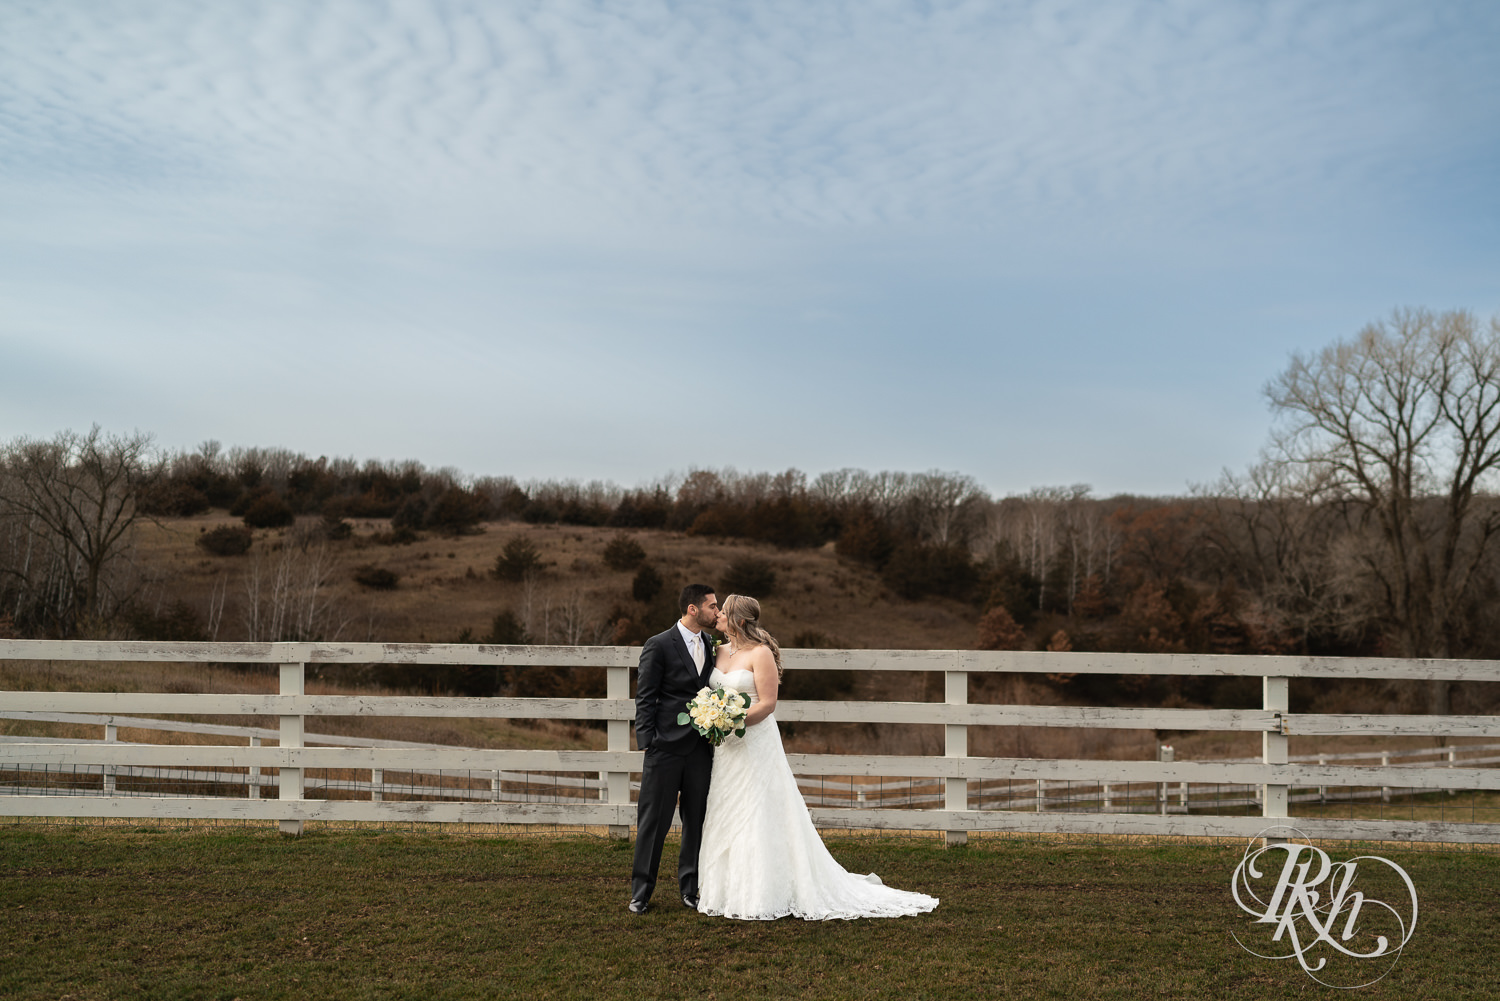 Bride and groom kiss on wedding day at Almquist Farm in Hastings, Minnesota.